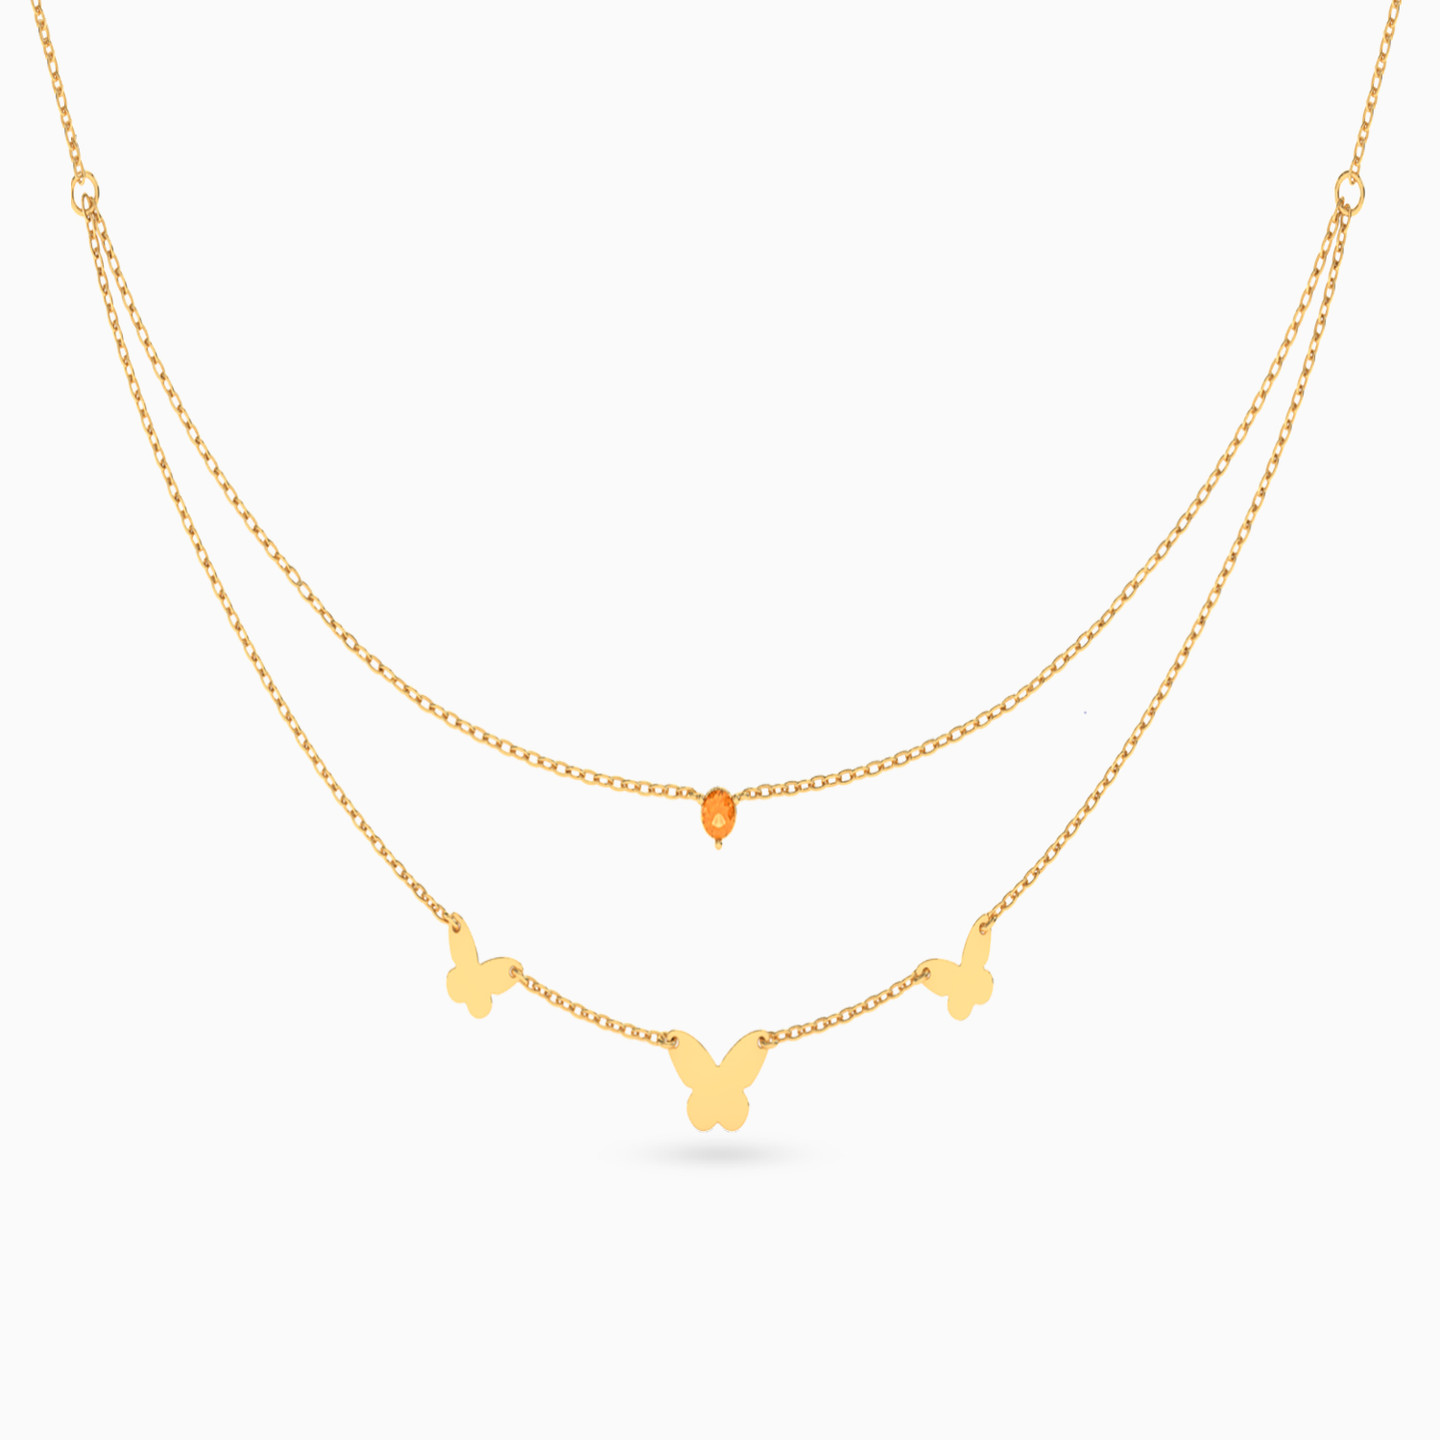 18K Gold Colored Stones Layered Necklace